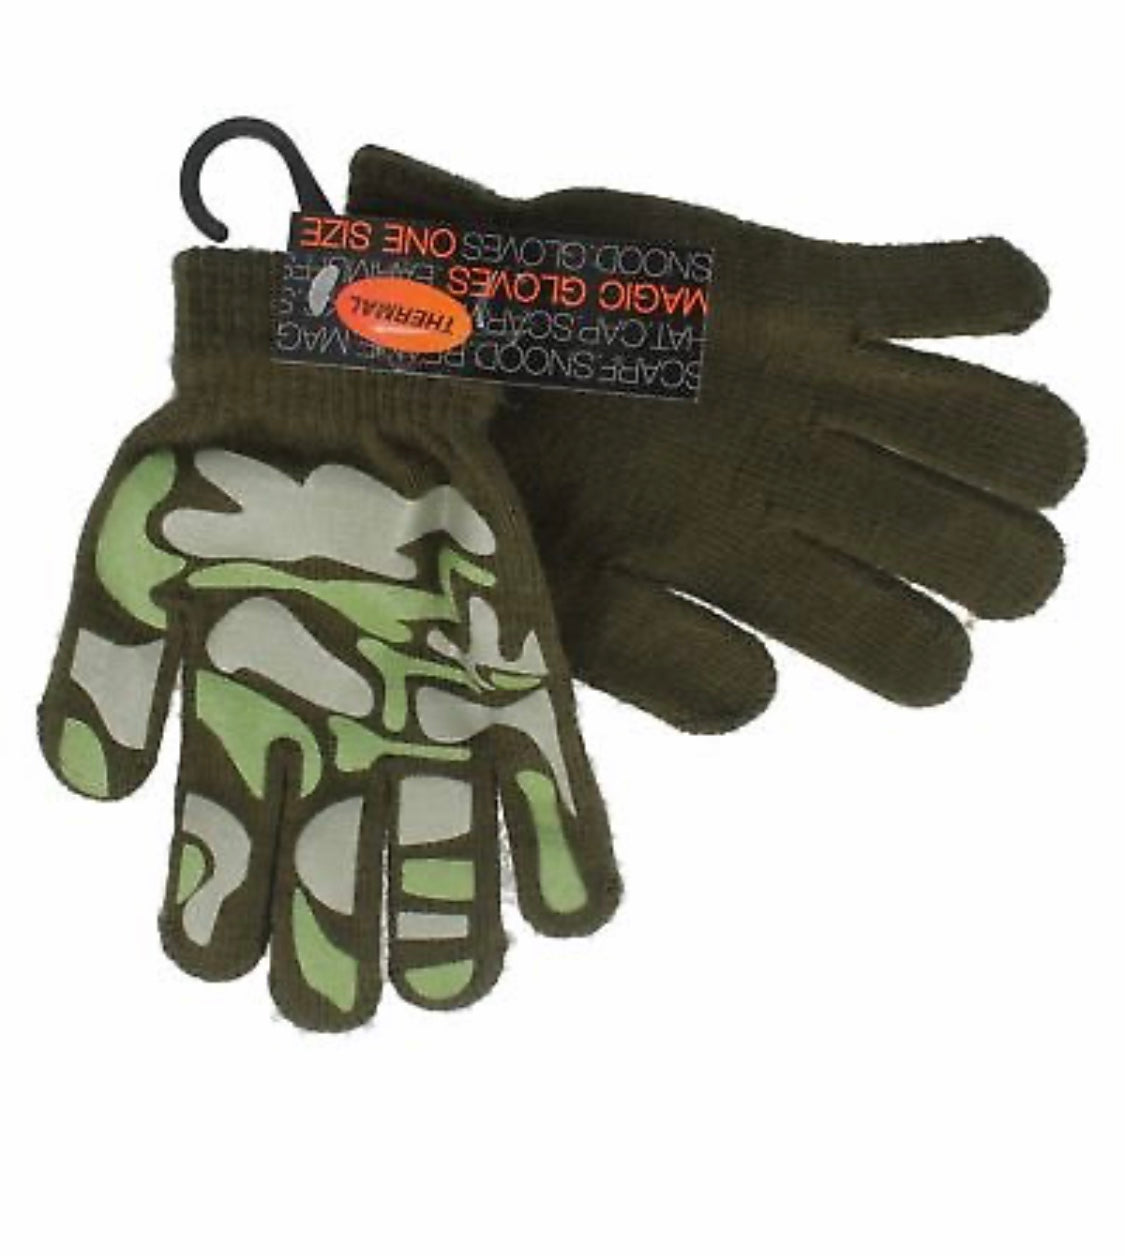 Childs Magic Gloves - Camouflage Print